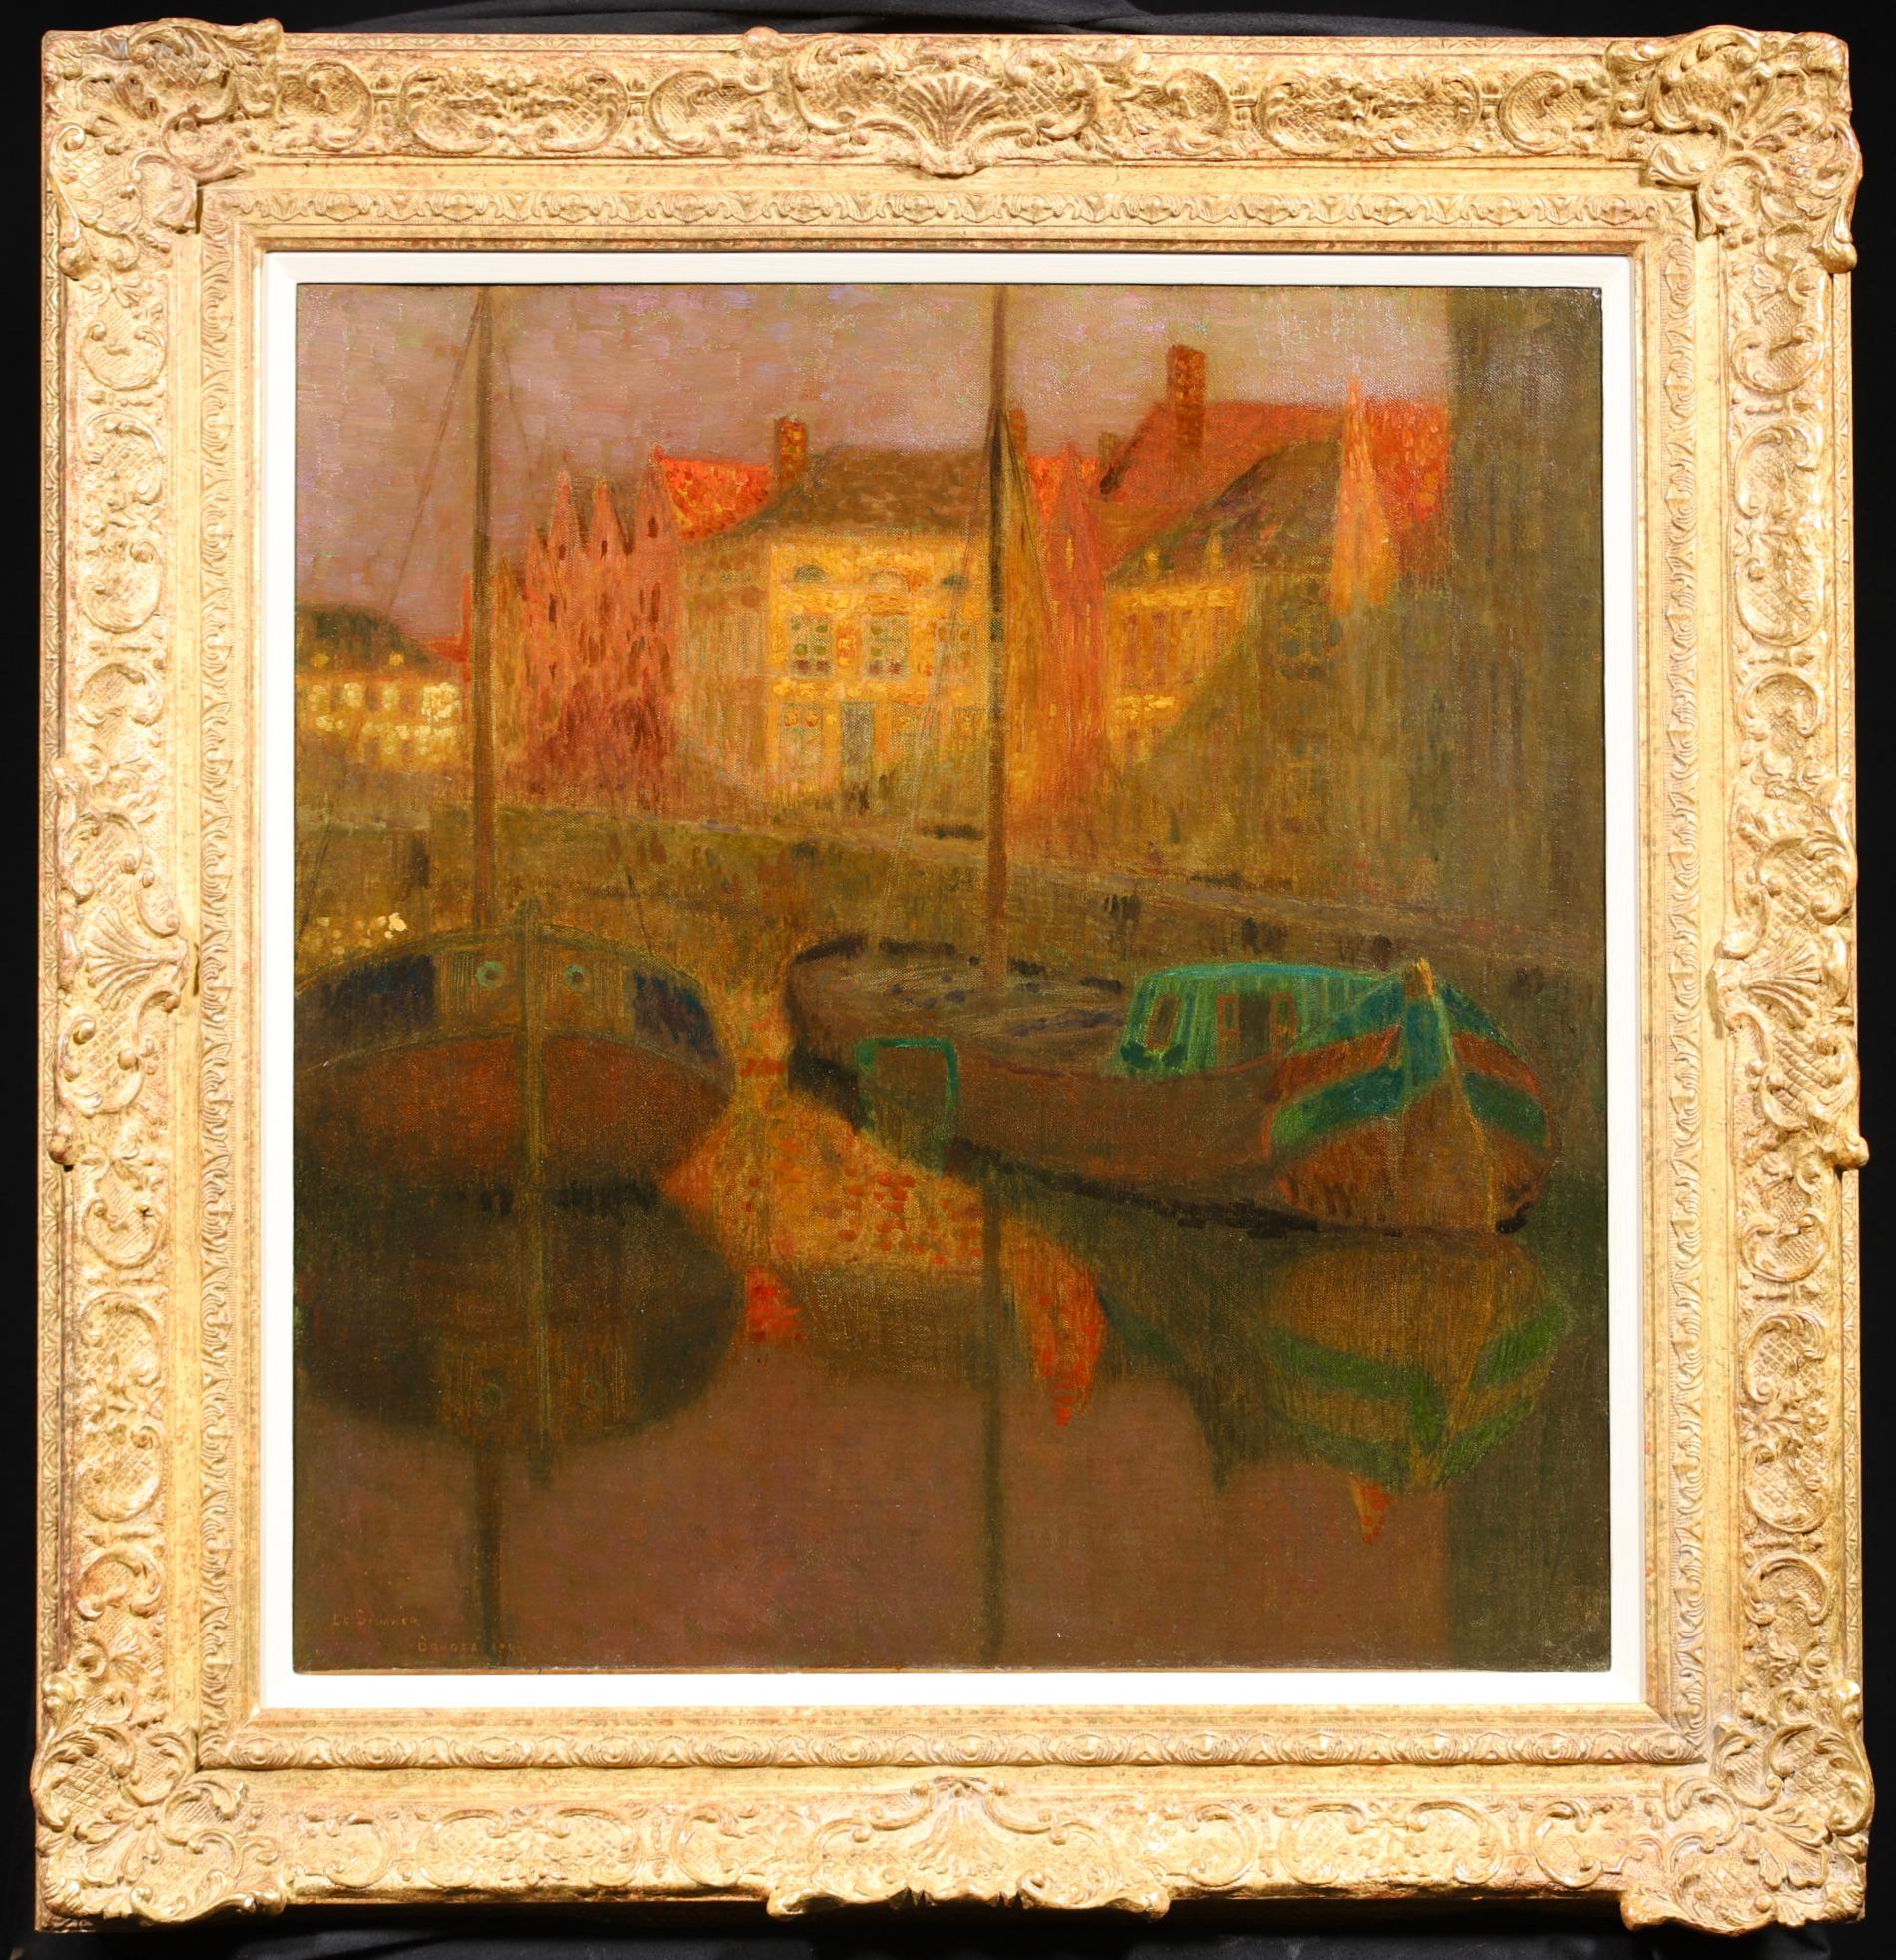 Signed post impressionist landscape oil on canvas by French painter Henri Le Sidaner. This stunning piece  depicts two fishing boats moored in a fishing village at sunset. The last light of the day illuminates the buildings waterside. A truly